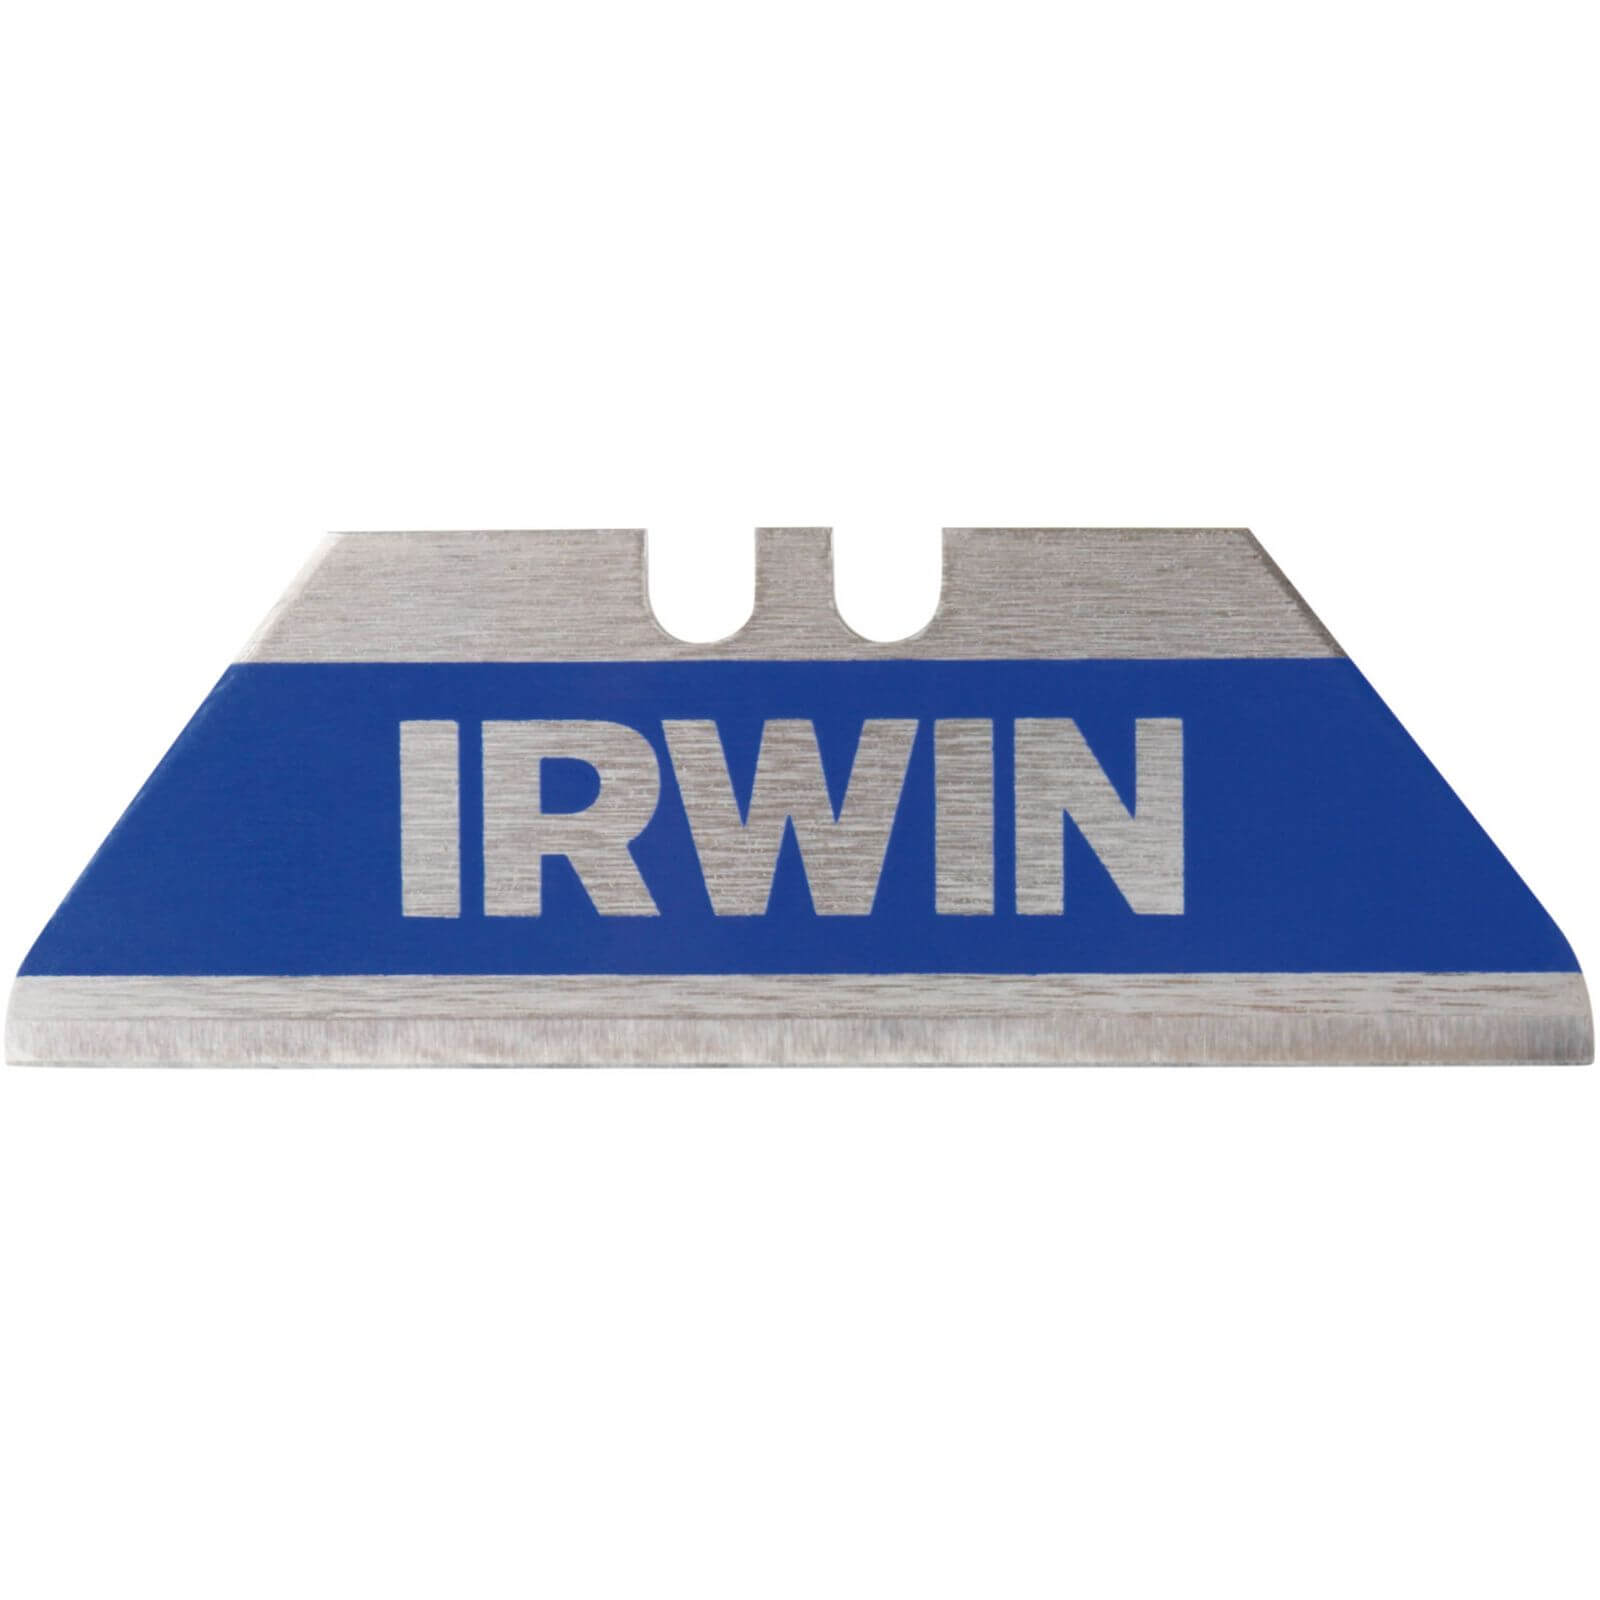 Photo of Irwin Bi-metal Safety Blades - Pack Of 5